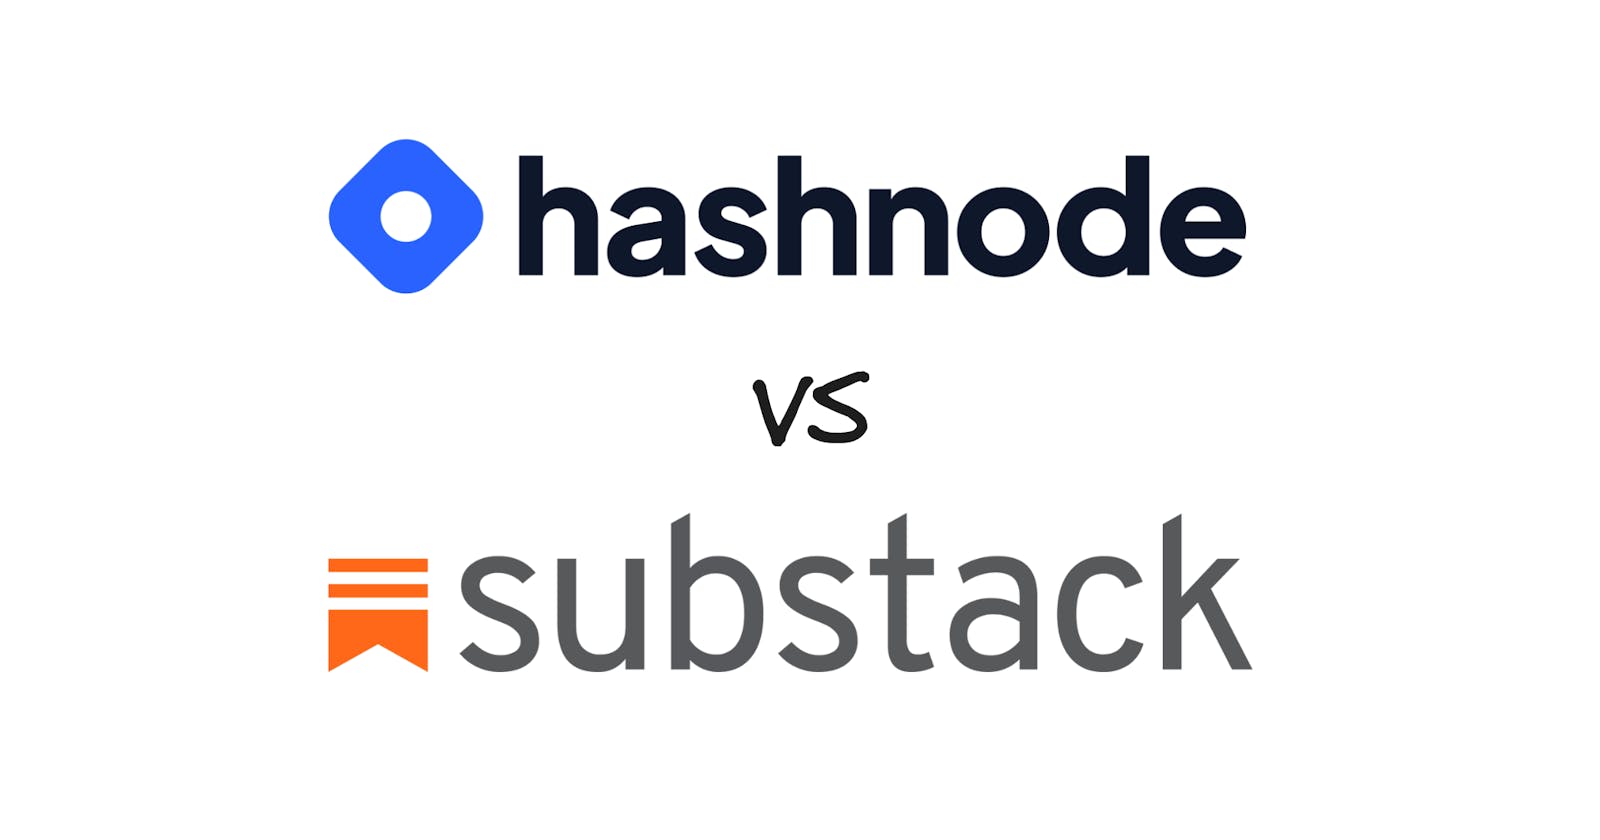 We moved our blogs from Substack to Hashnode! Here's why?